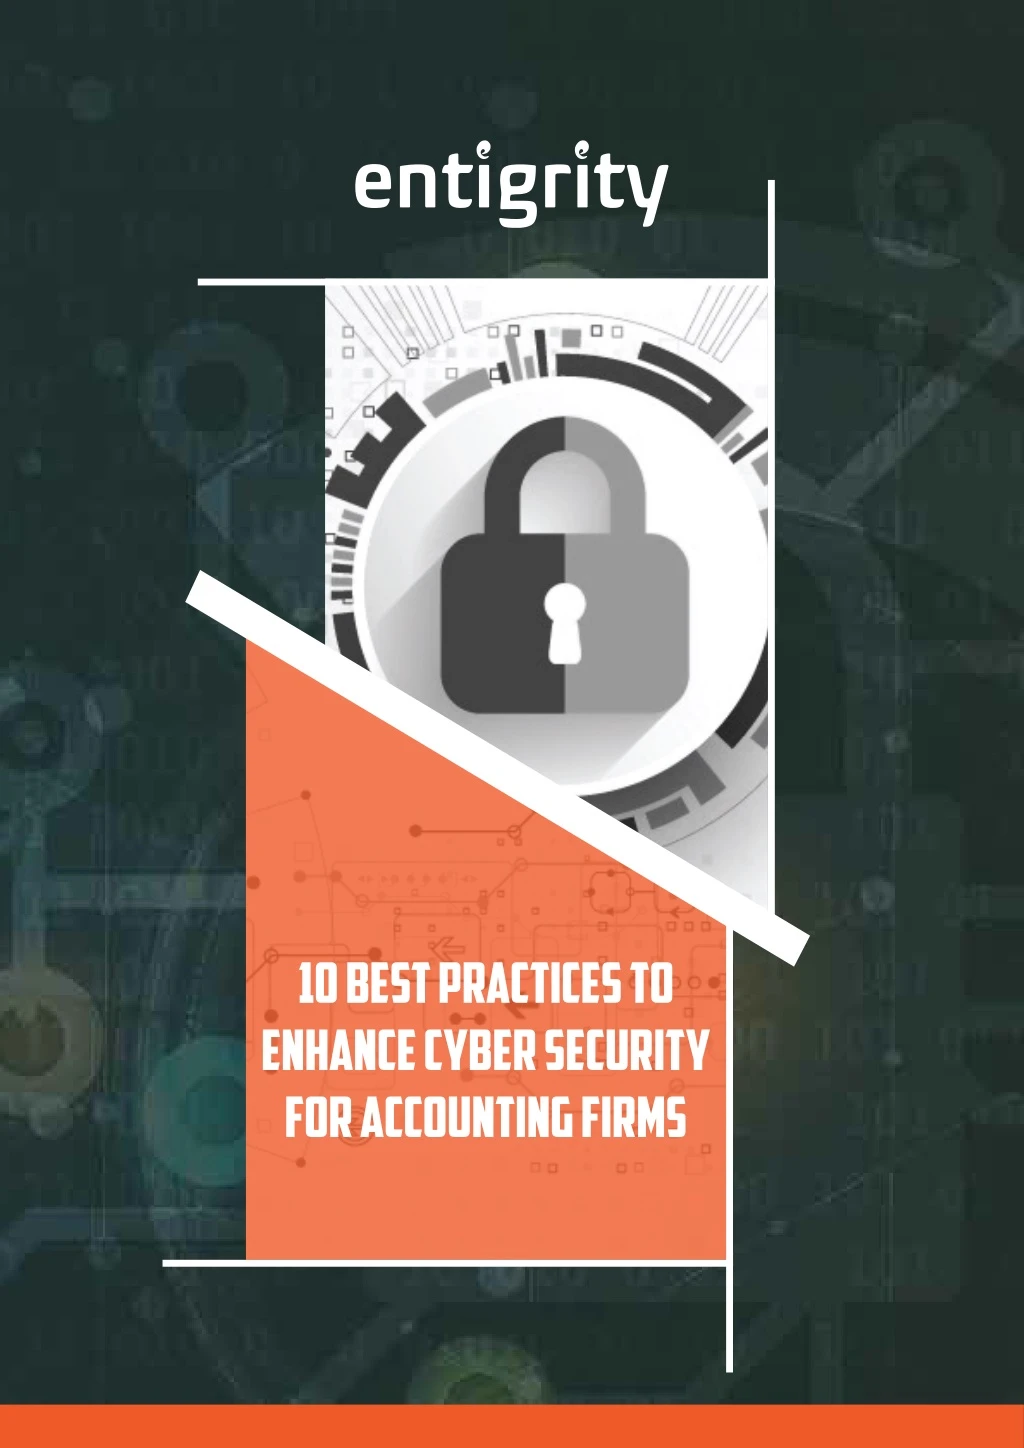 10 best practices to enhance cyber security